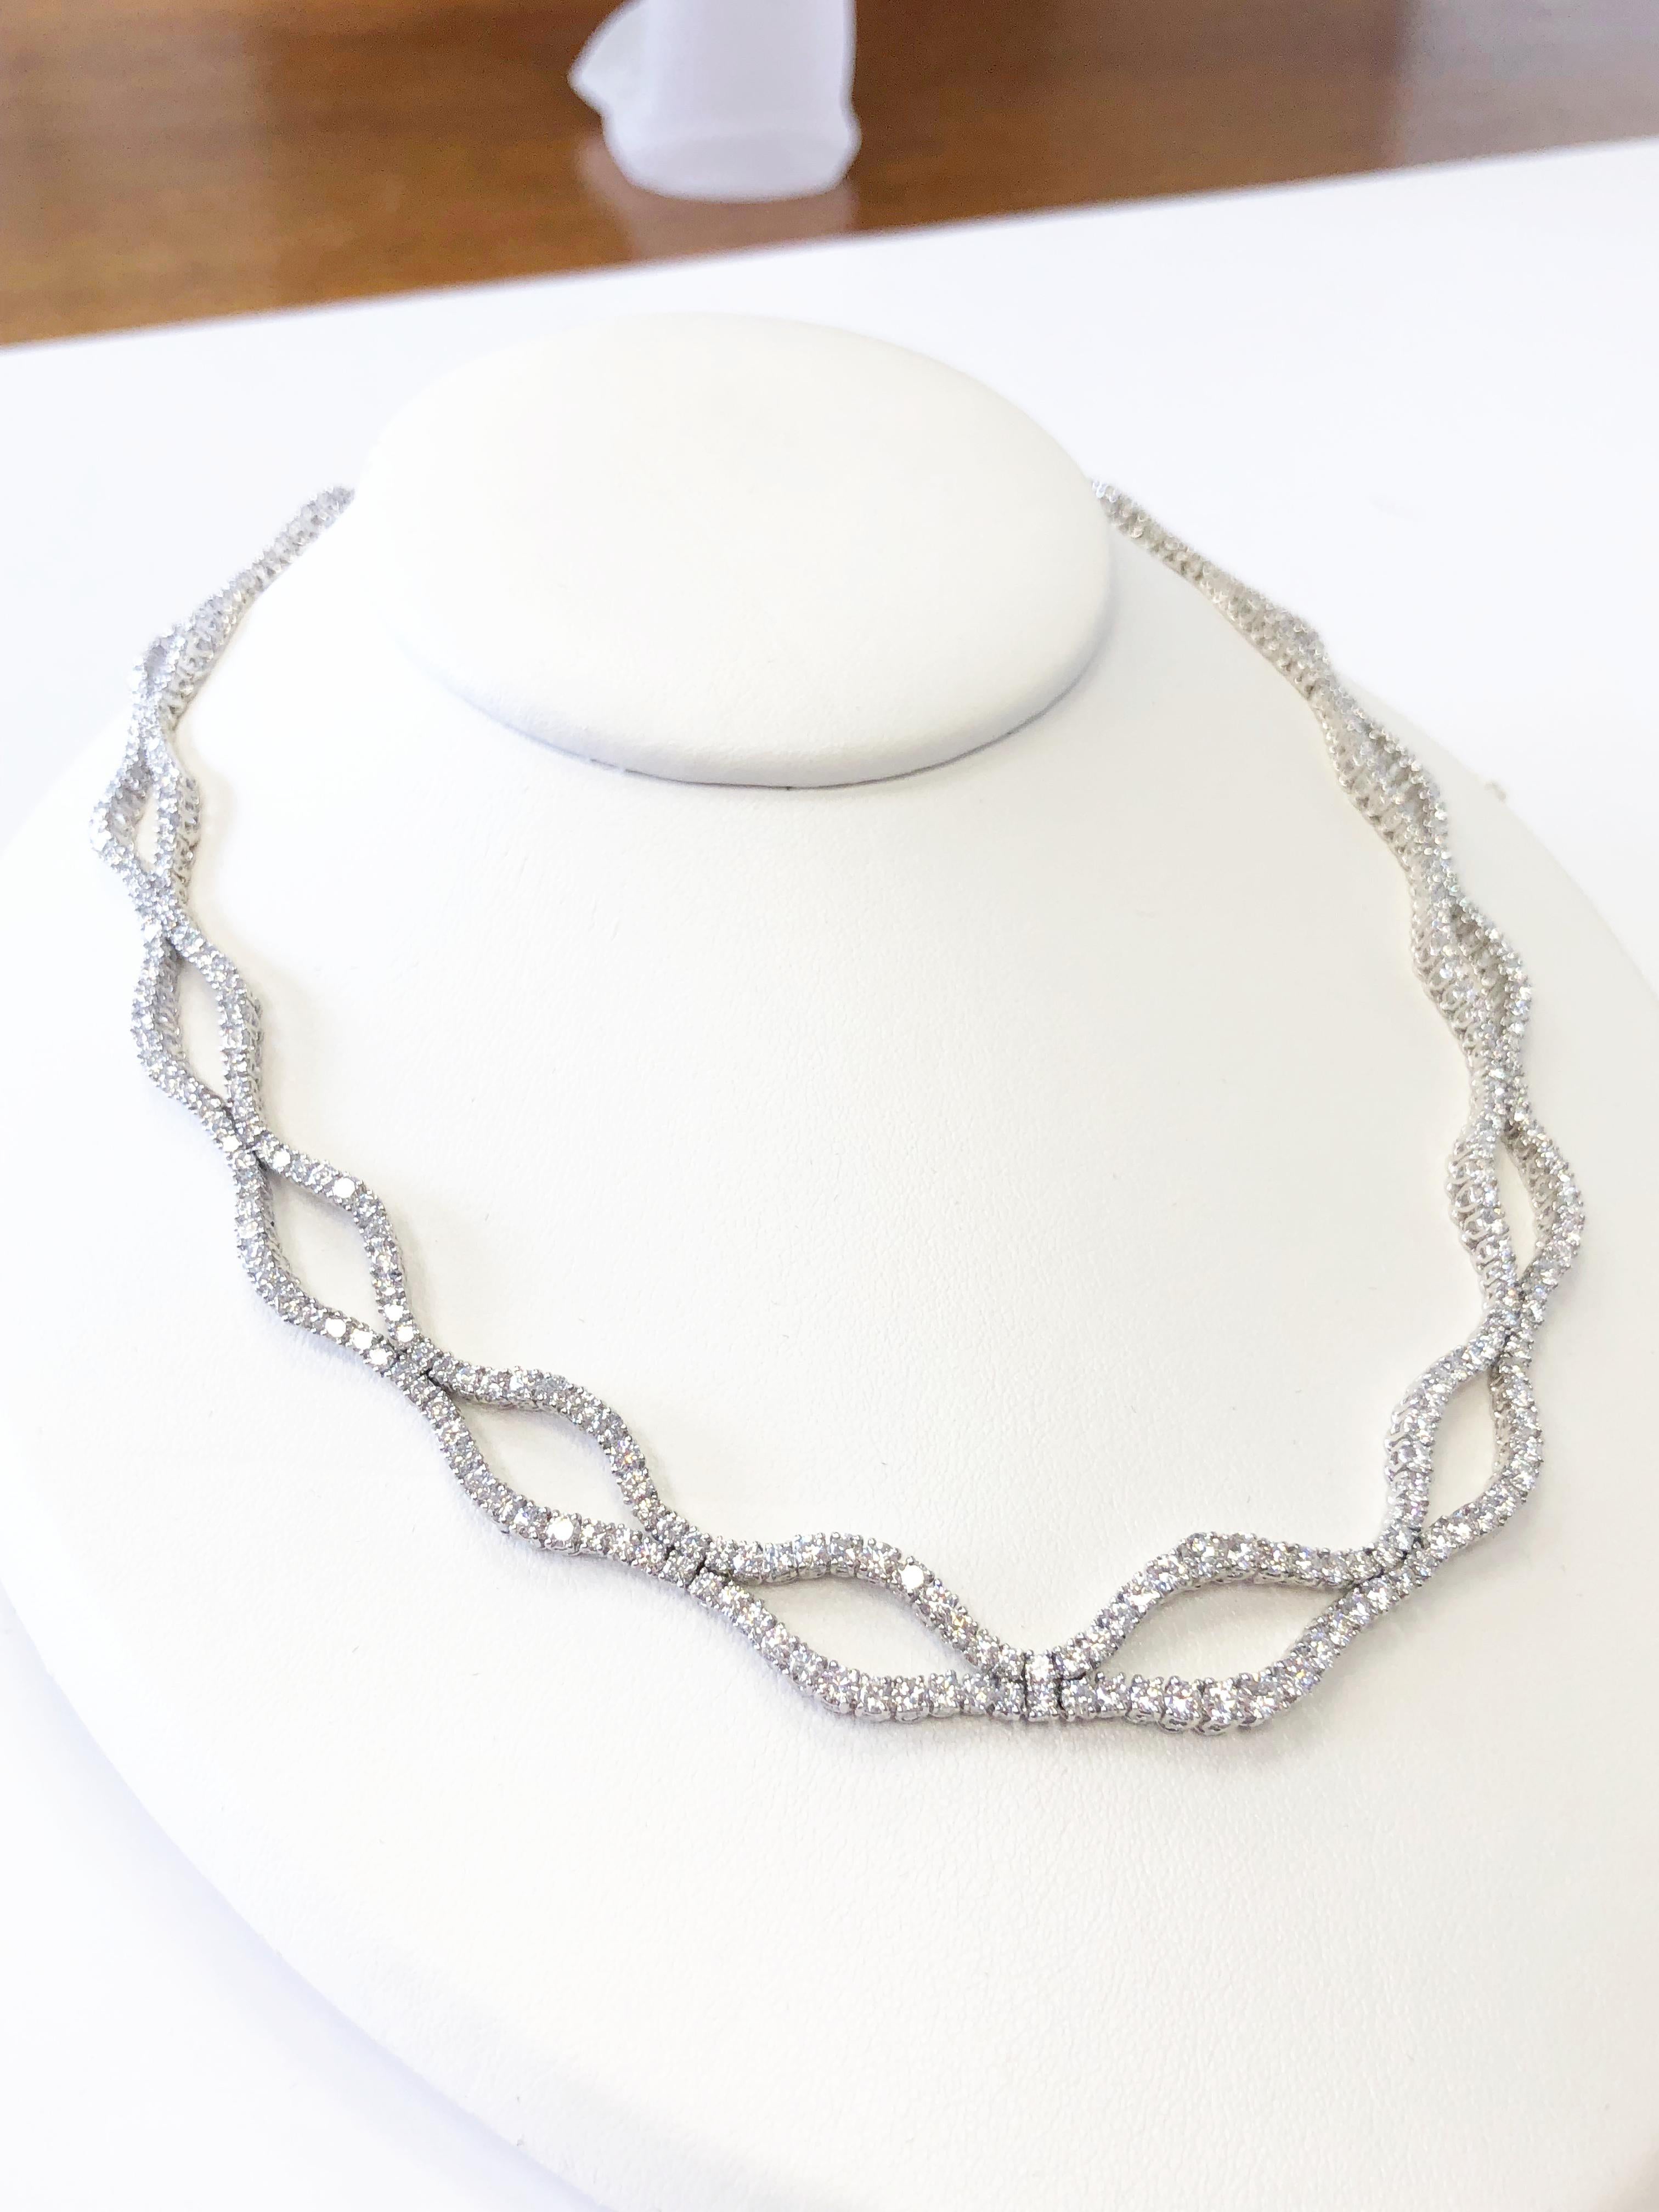 Beautifully designed white diamond round necklace and bracelet made with 28 carats of good quality, bright, and white diamonds set in platinum.  Handmade with great detail and flexibility.

